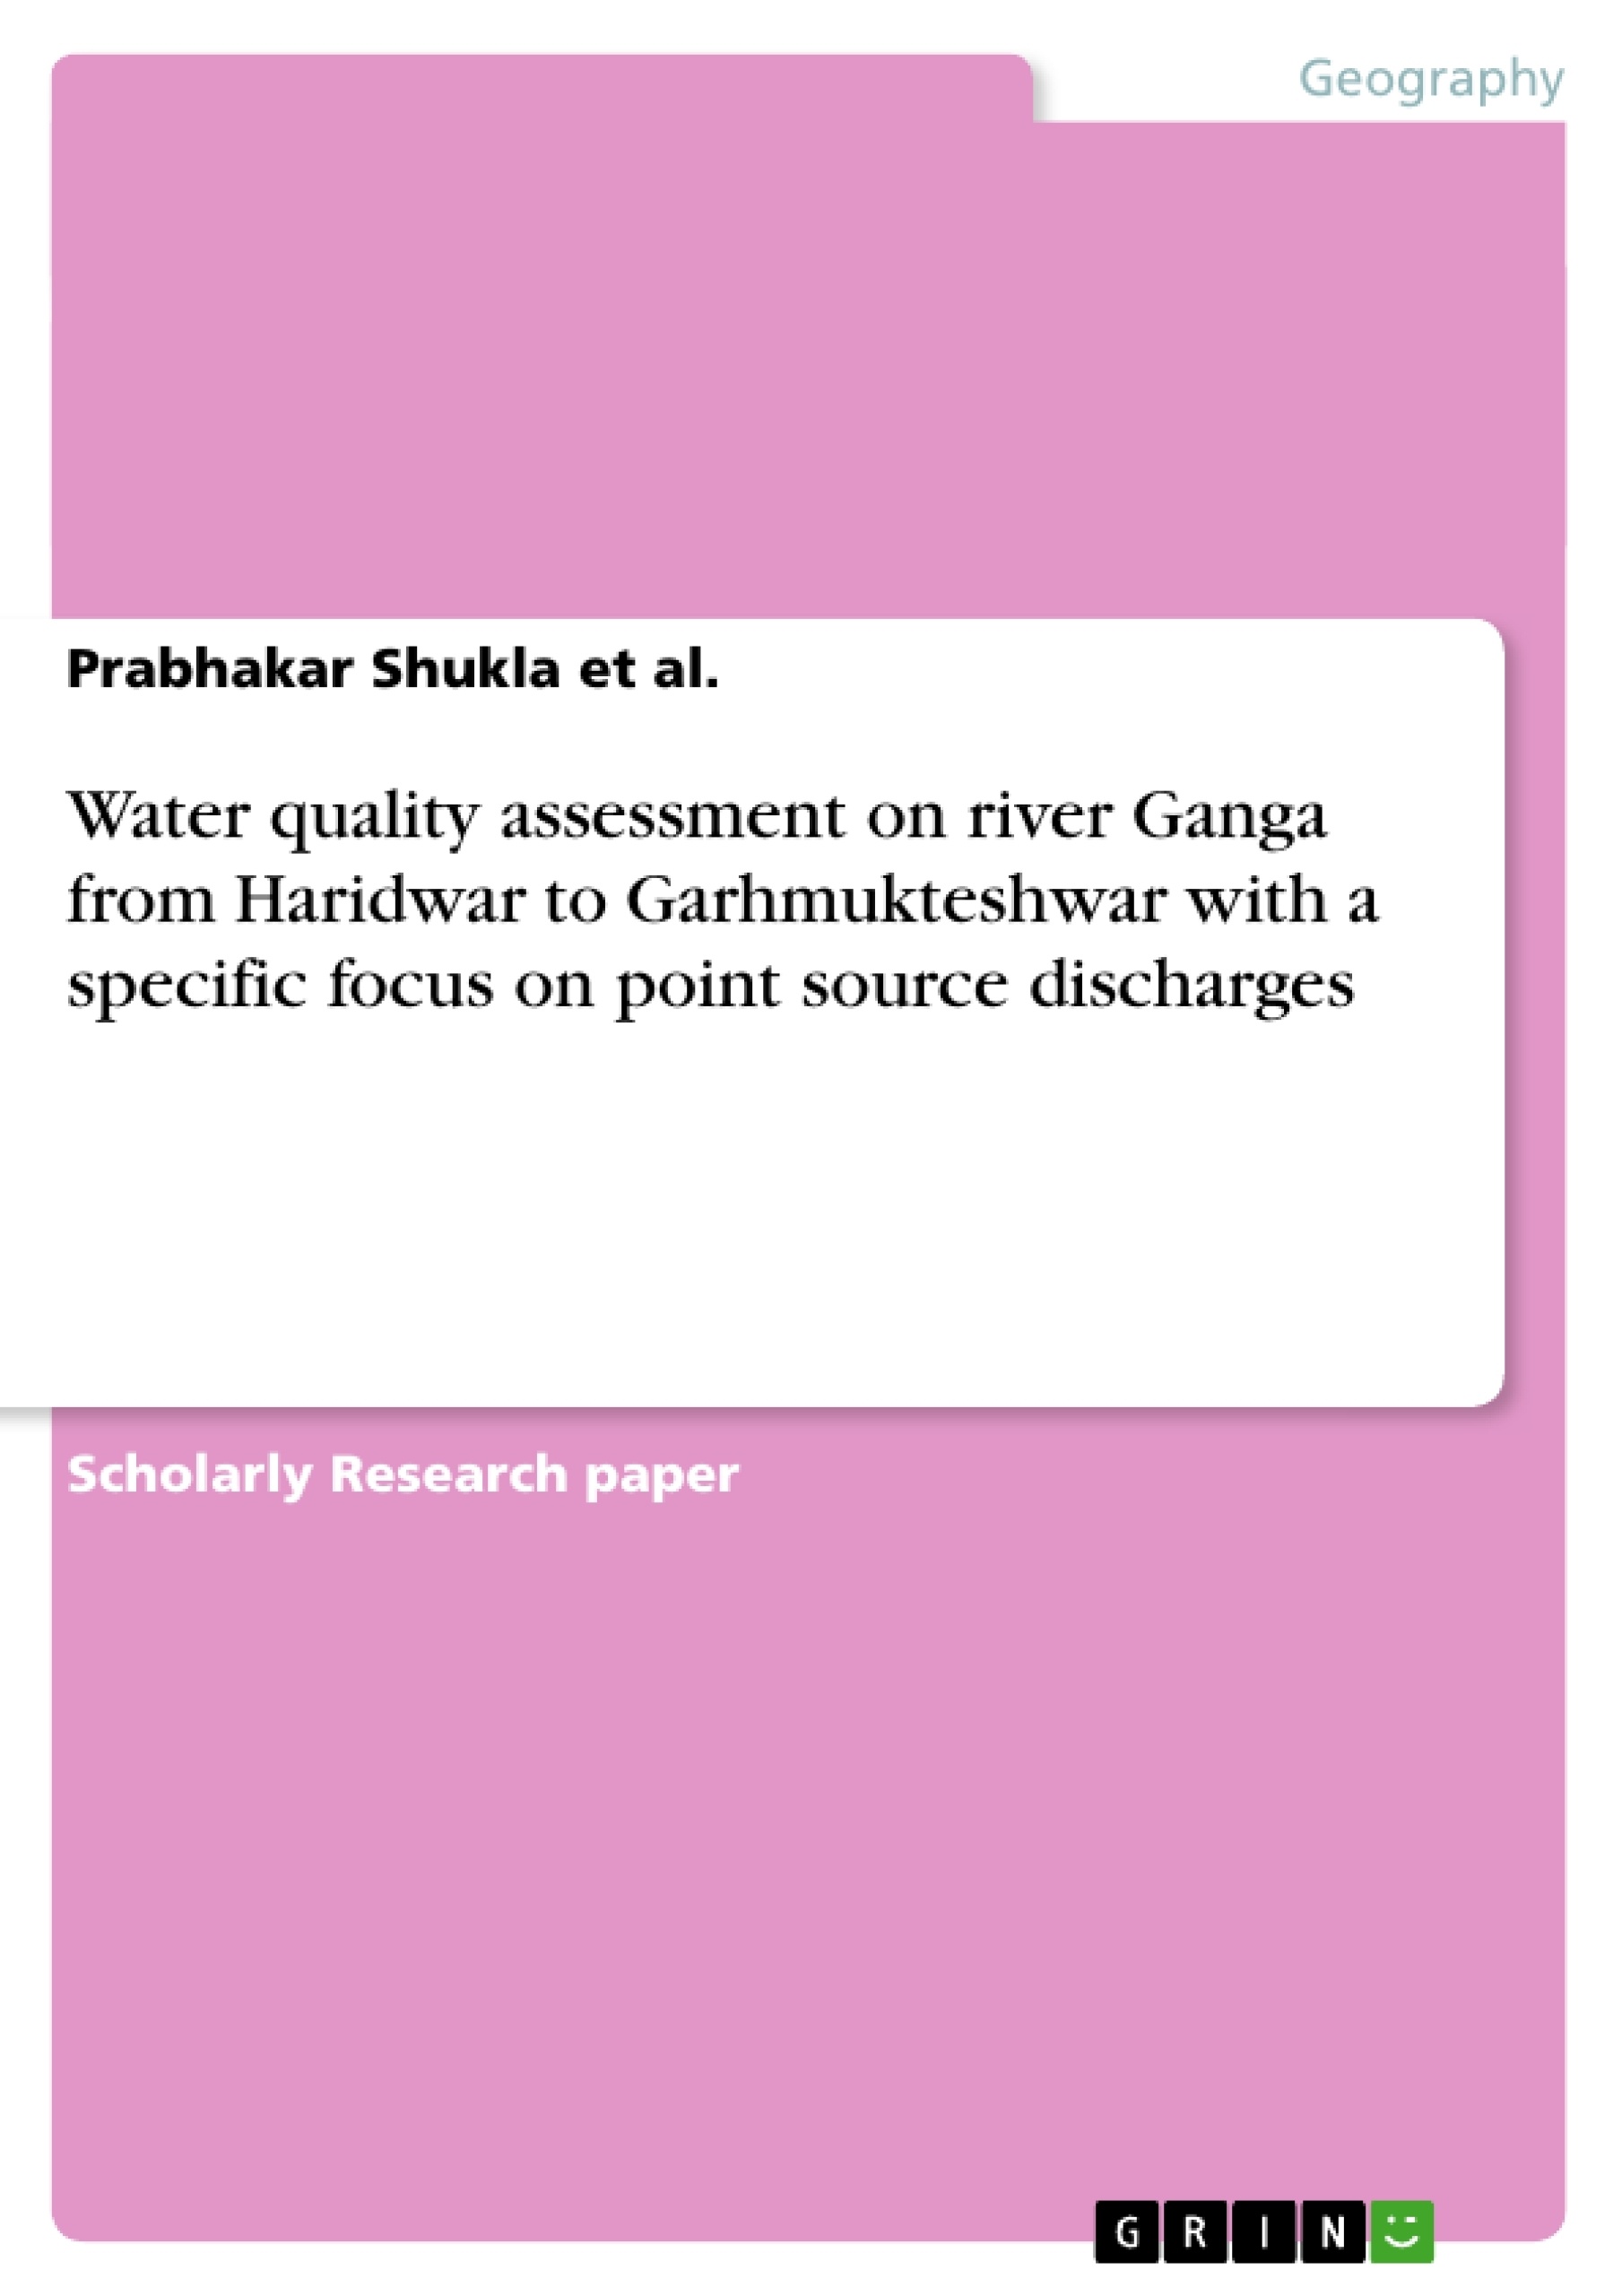 Titre: Water quality assessment on river Ganga from Haridwar to Garhmukteshwar with a specific focus on point source discharges